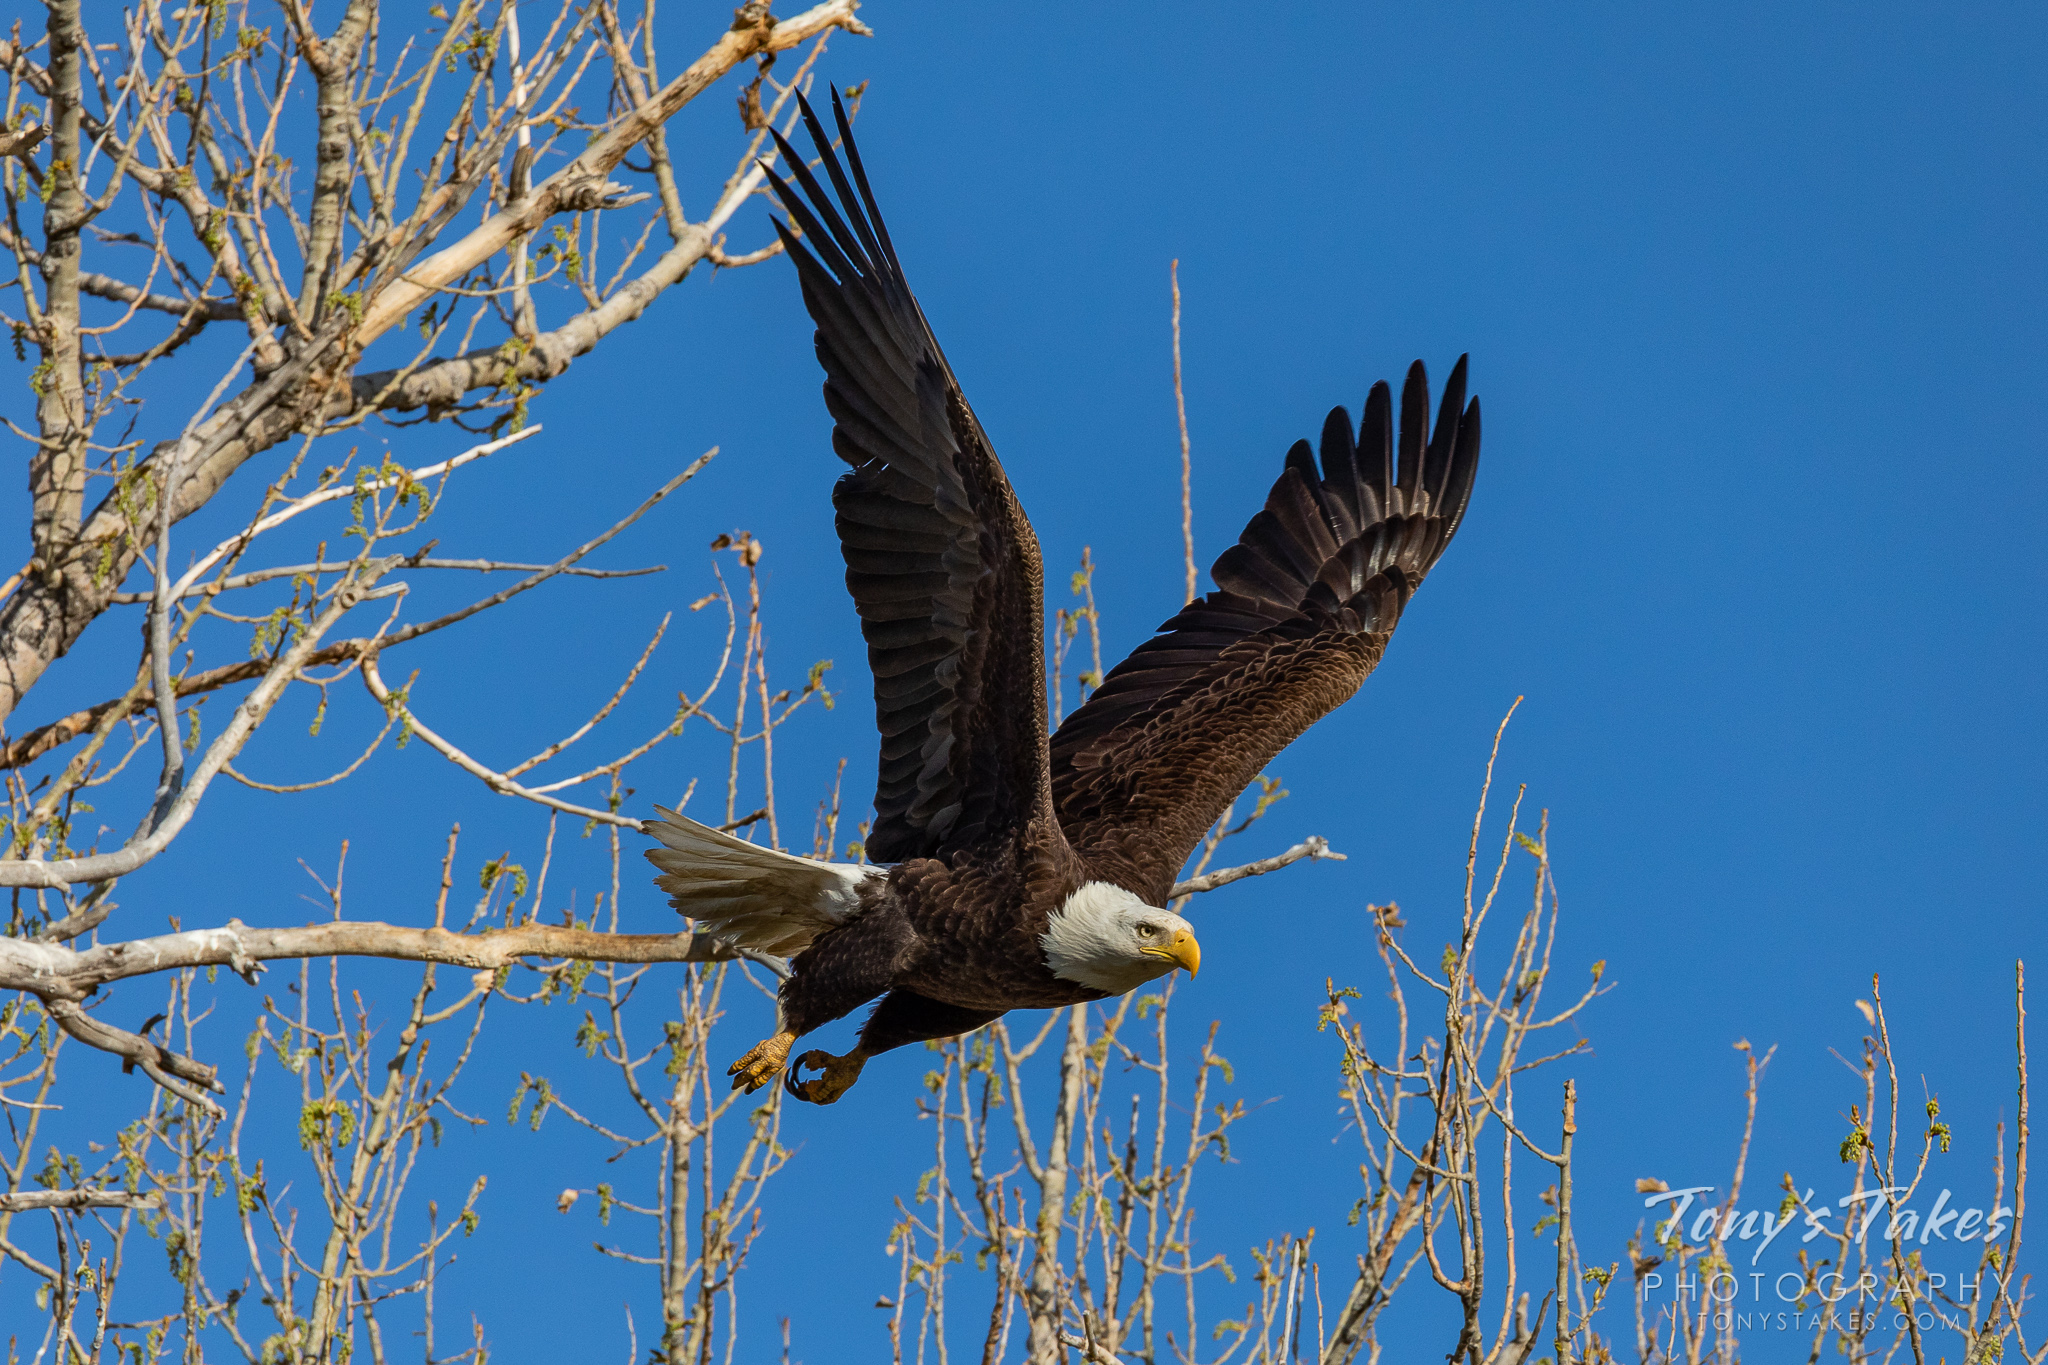 Bald eagle launches into the blue